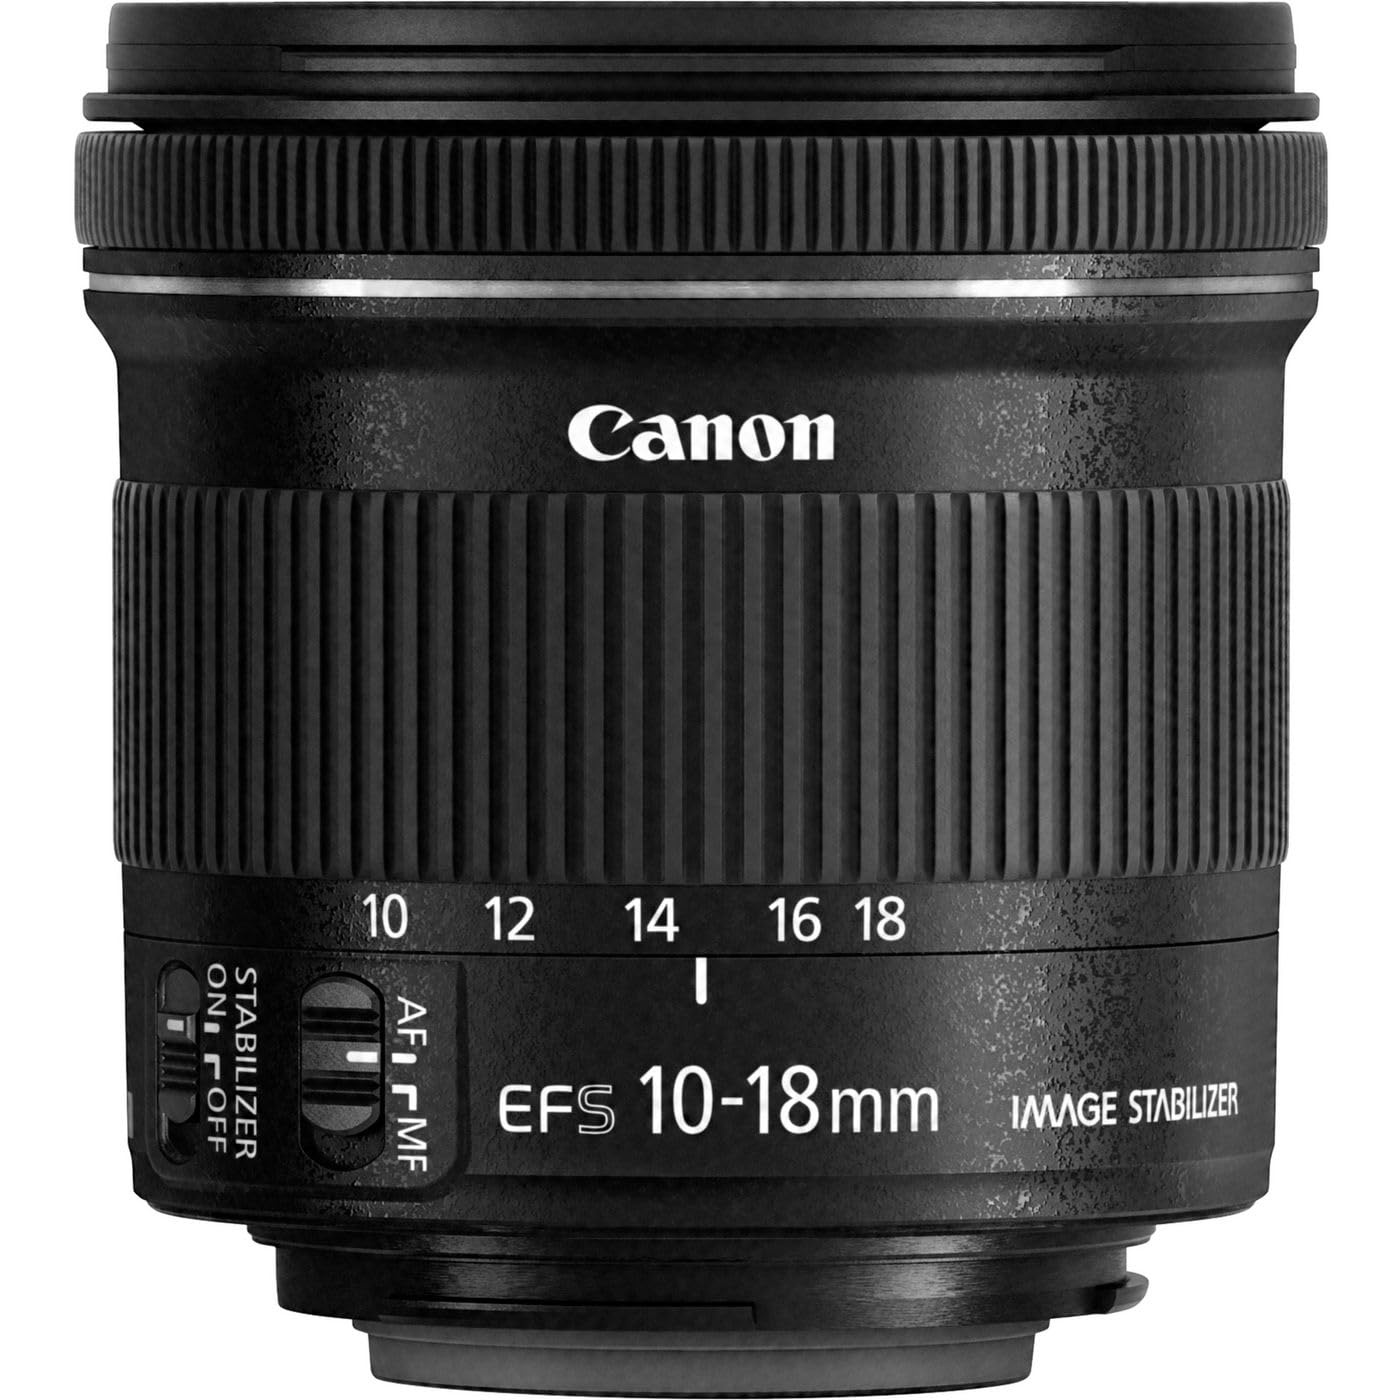 CANON Objectif EF-S 10-18mm f/4,5-5,6 is STM